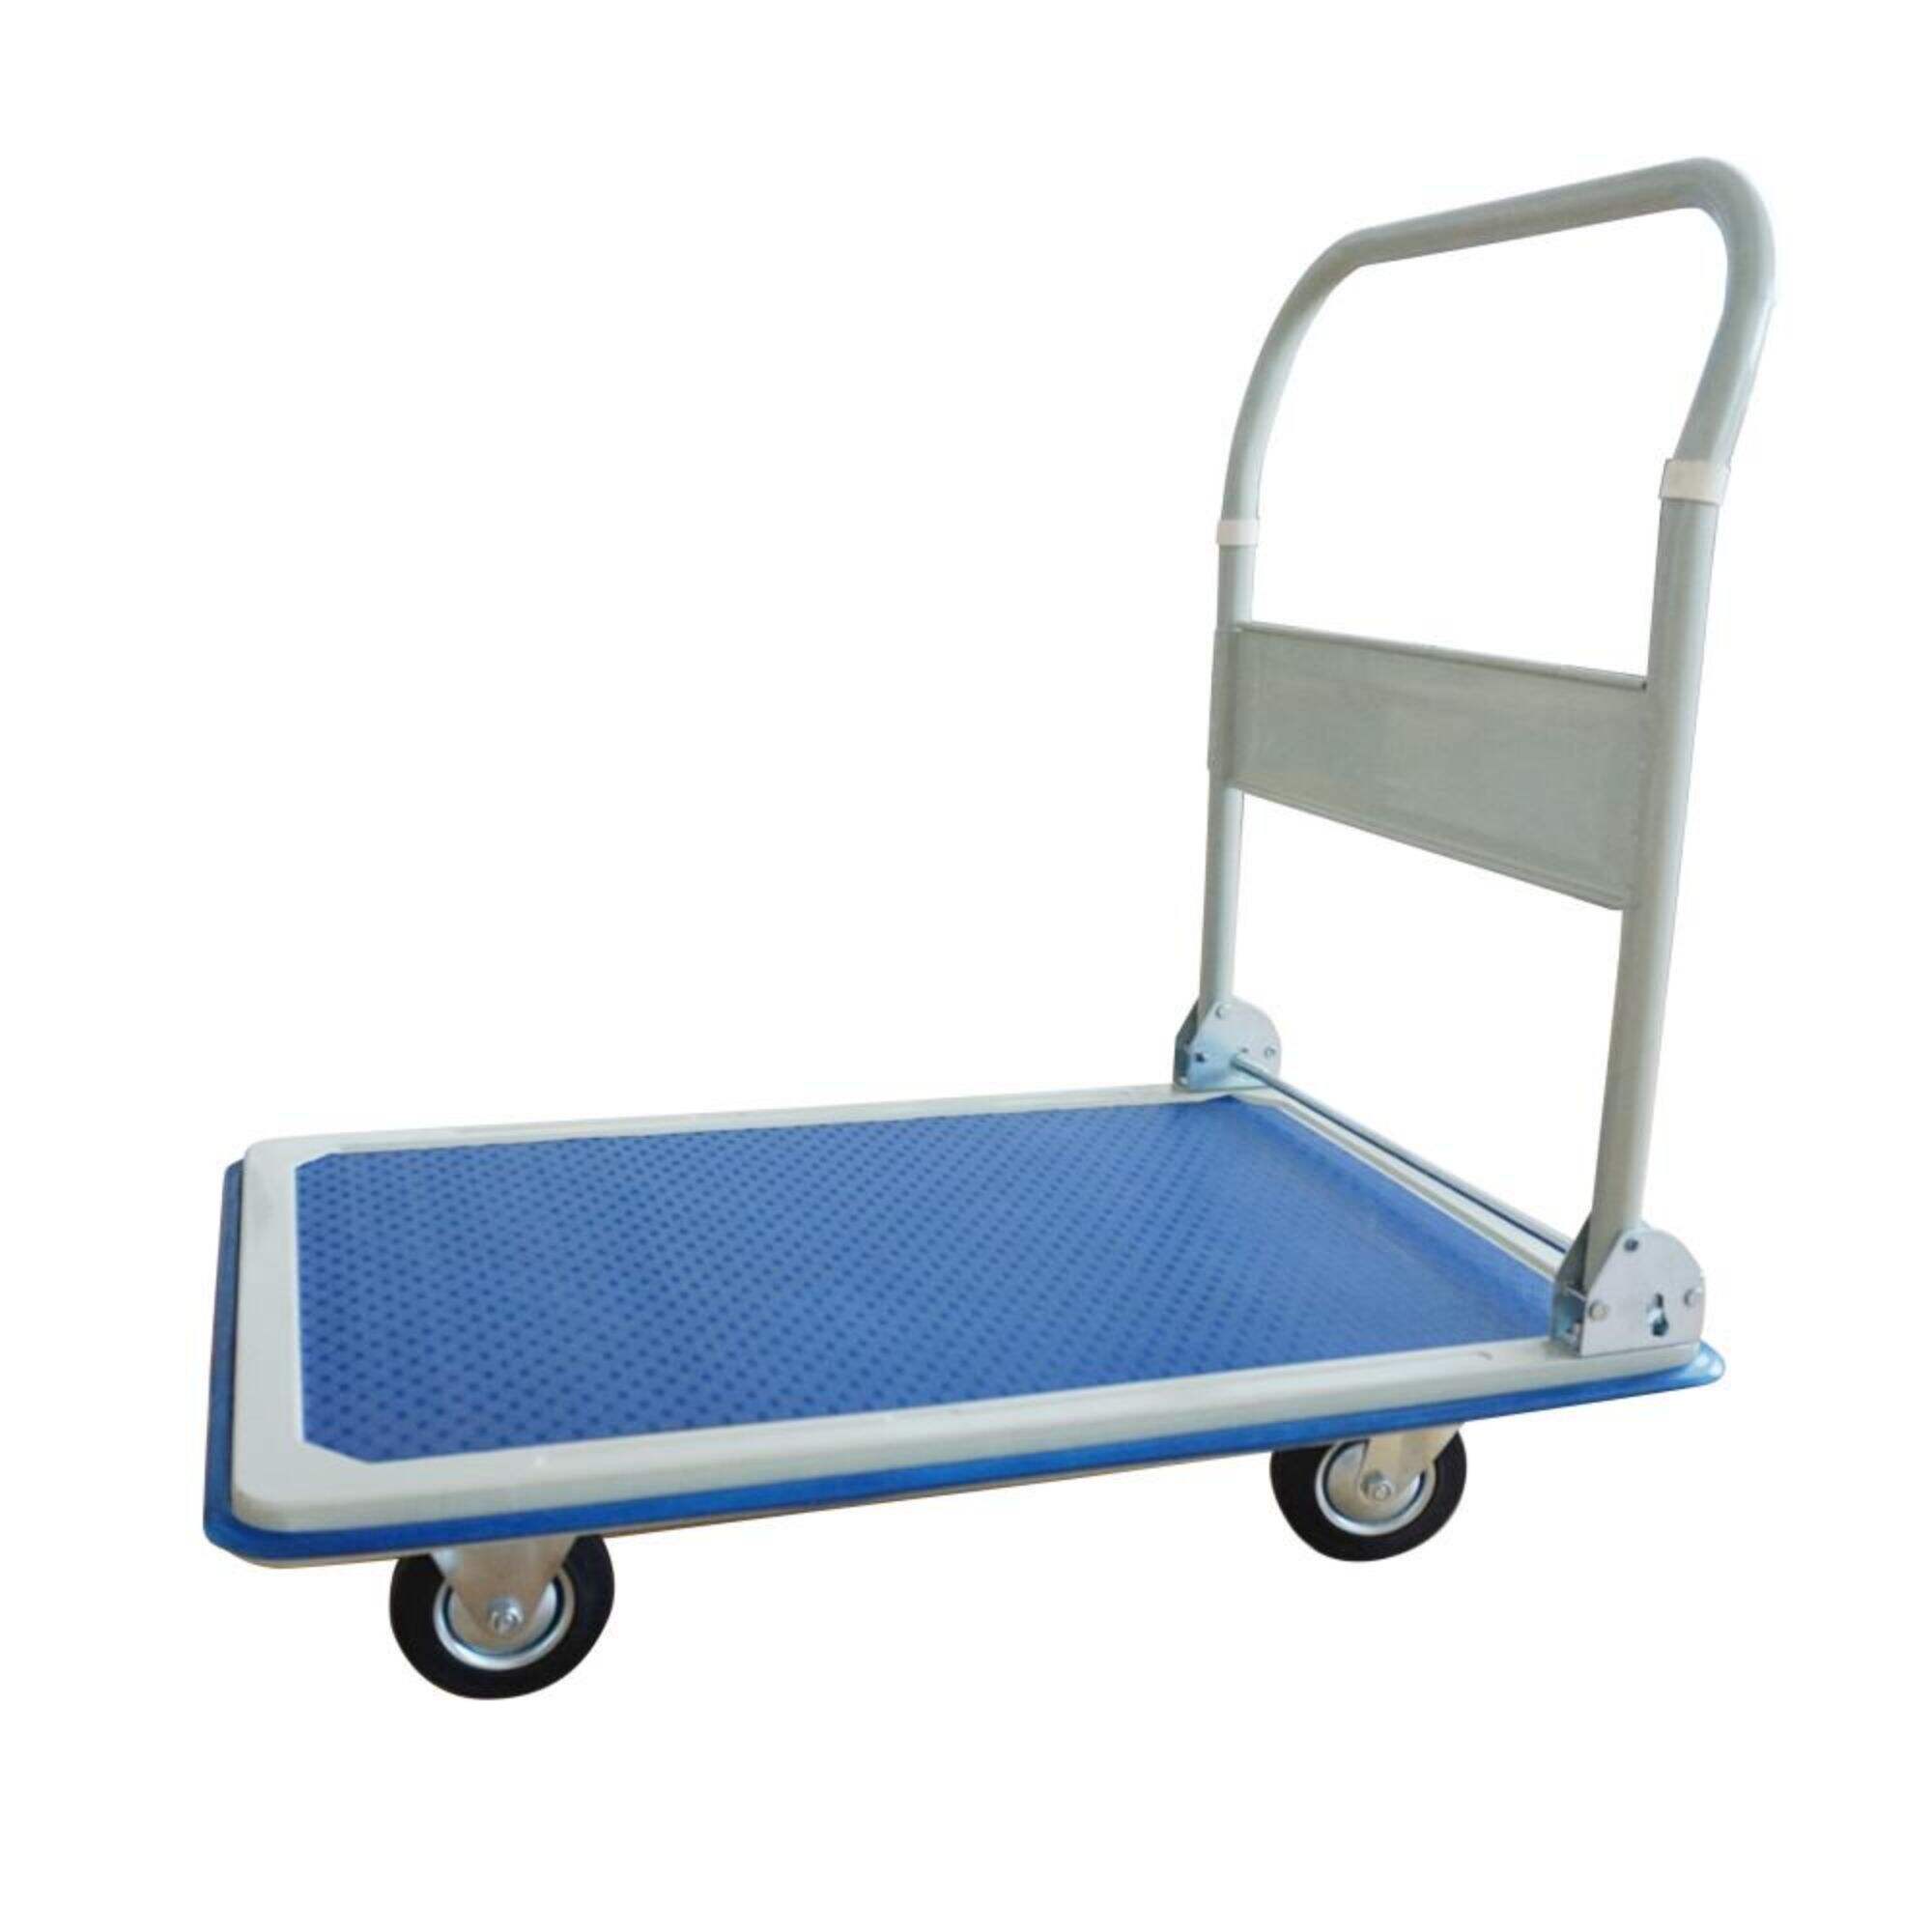 PH300 Platform Hand Truck, Folding Push Hand Dolly Cart for Loading and Storage, with 5